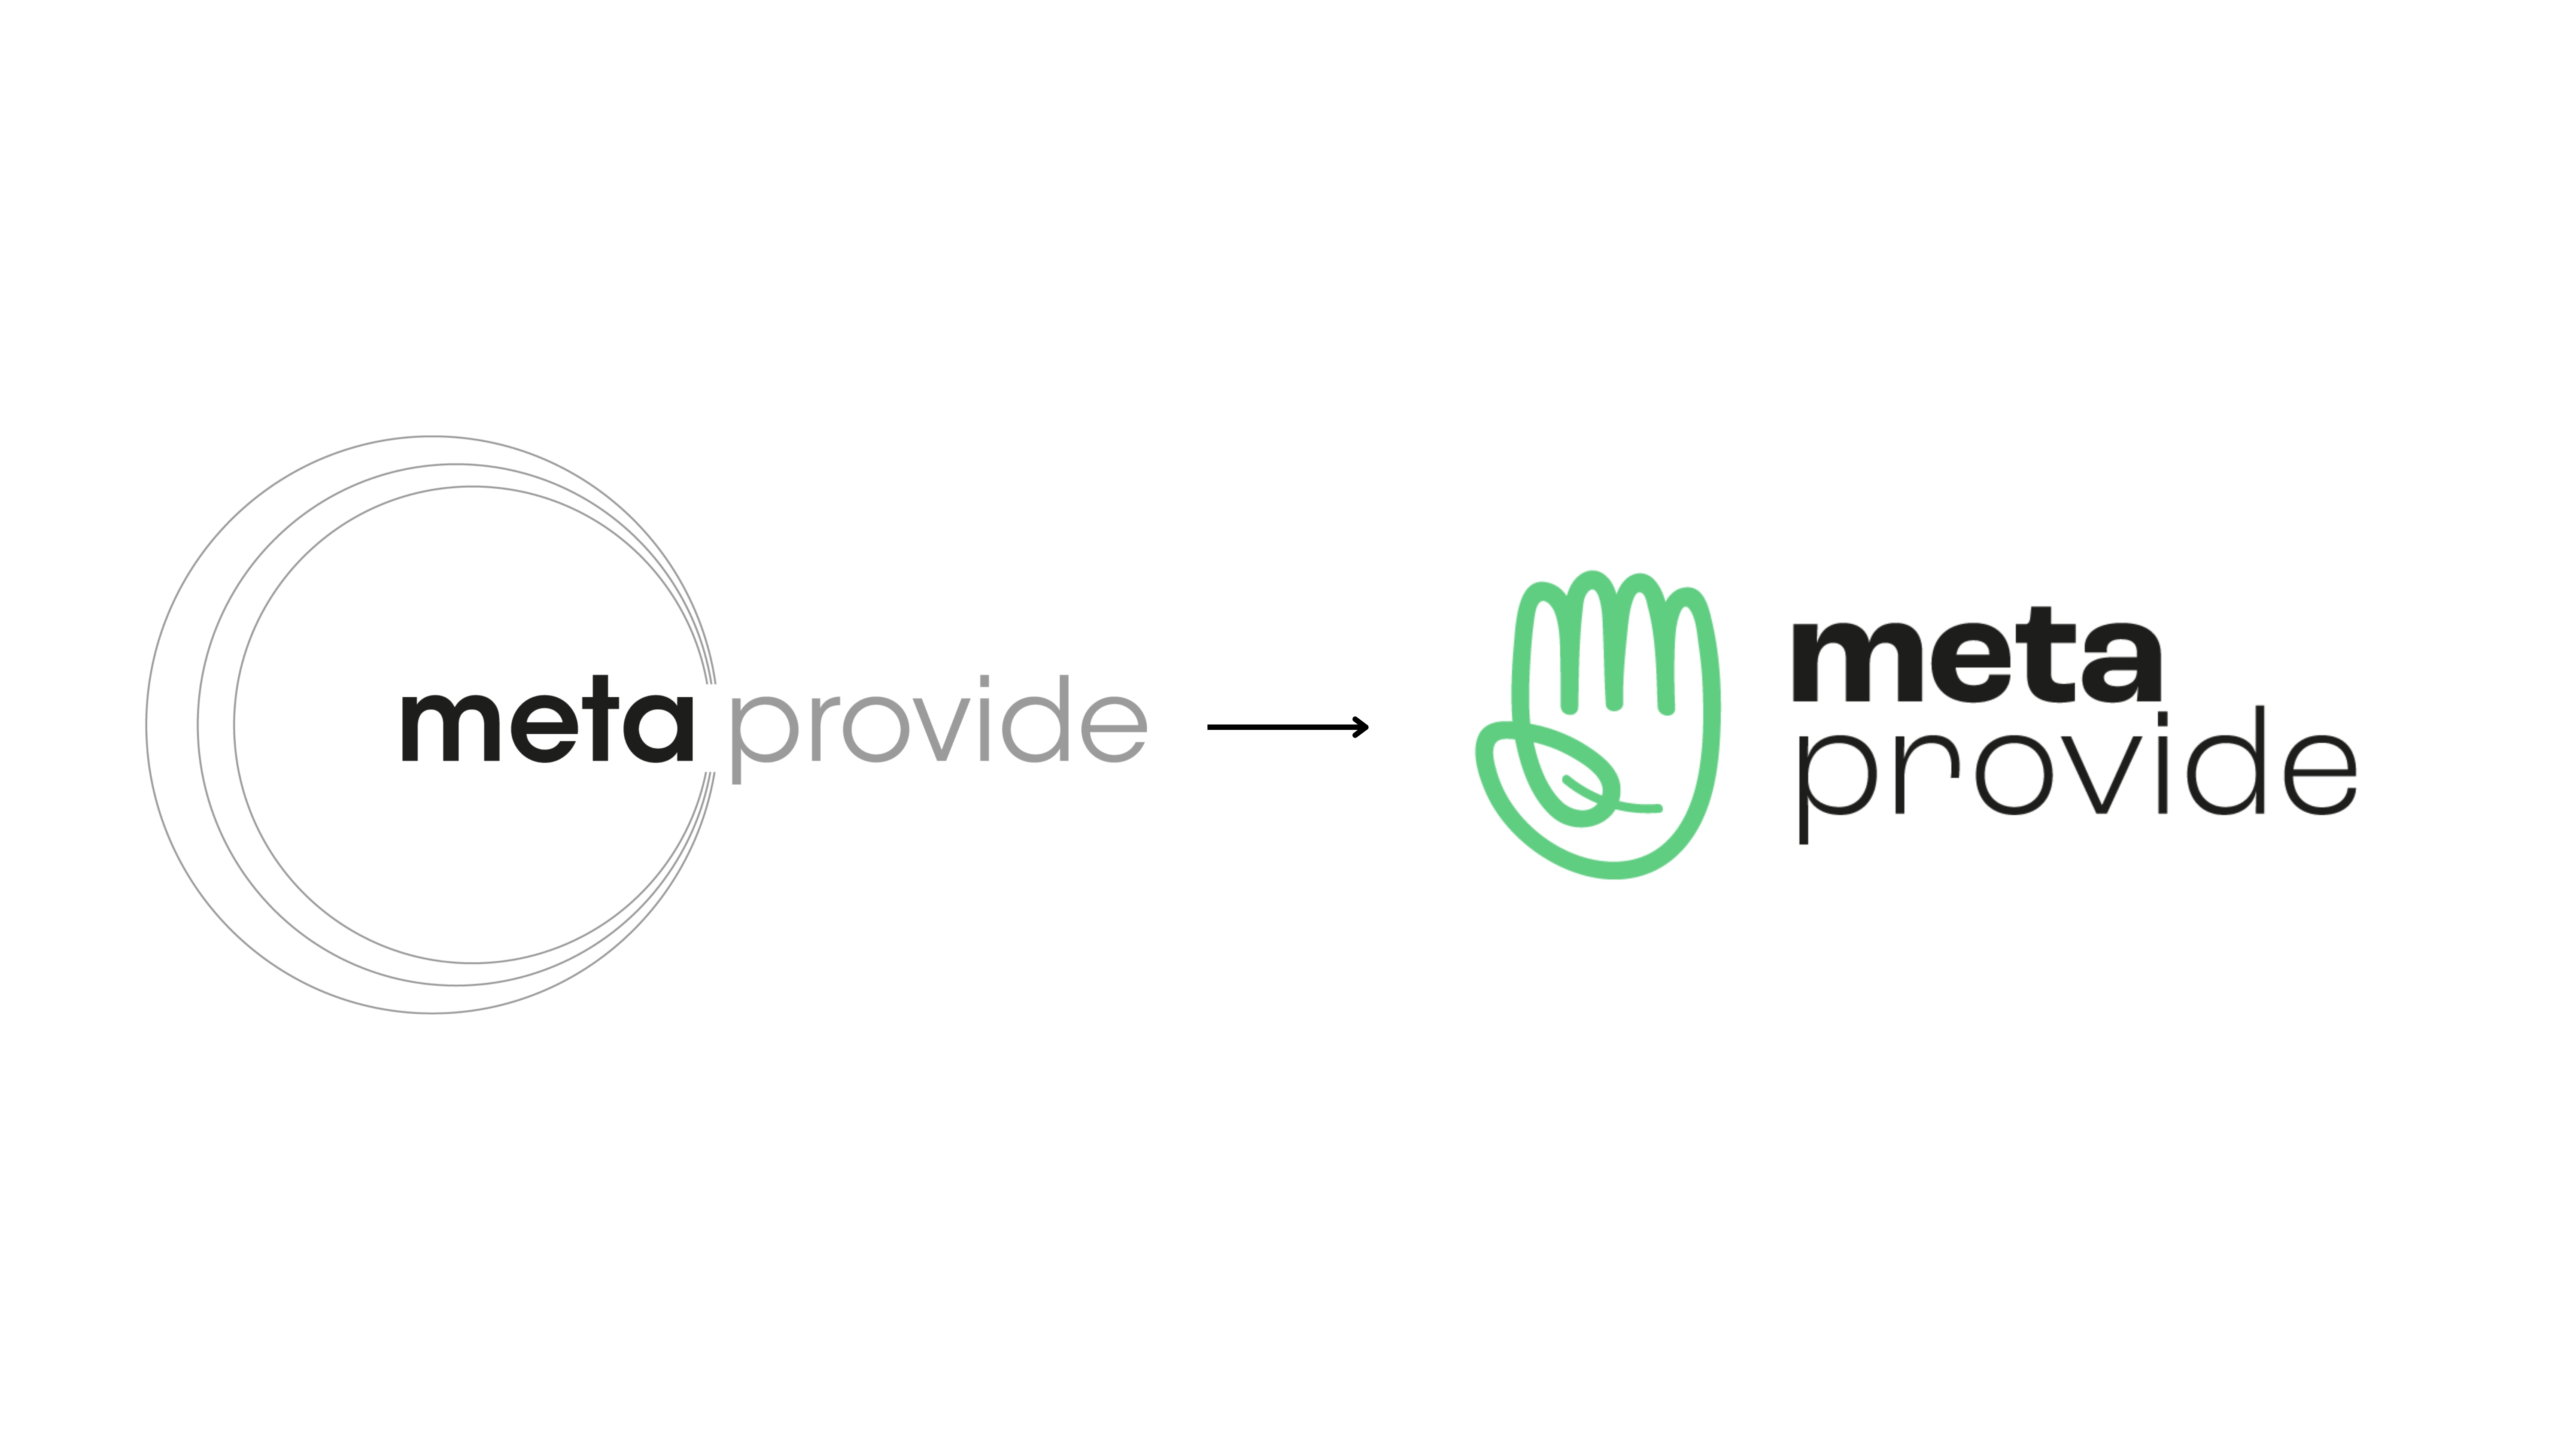 old to the new brand of metaprovide